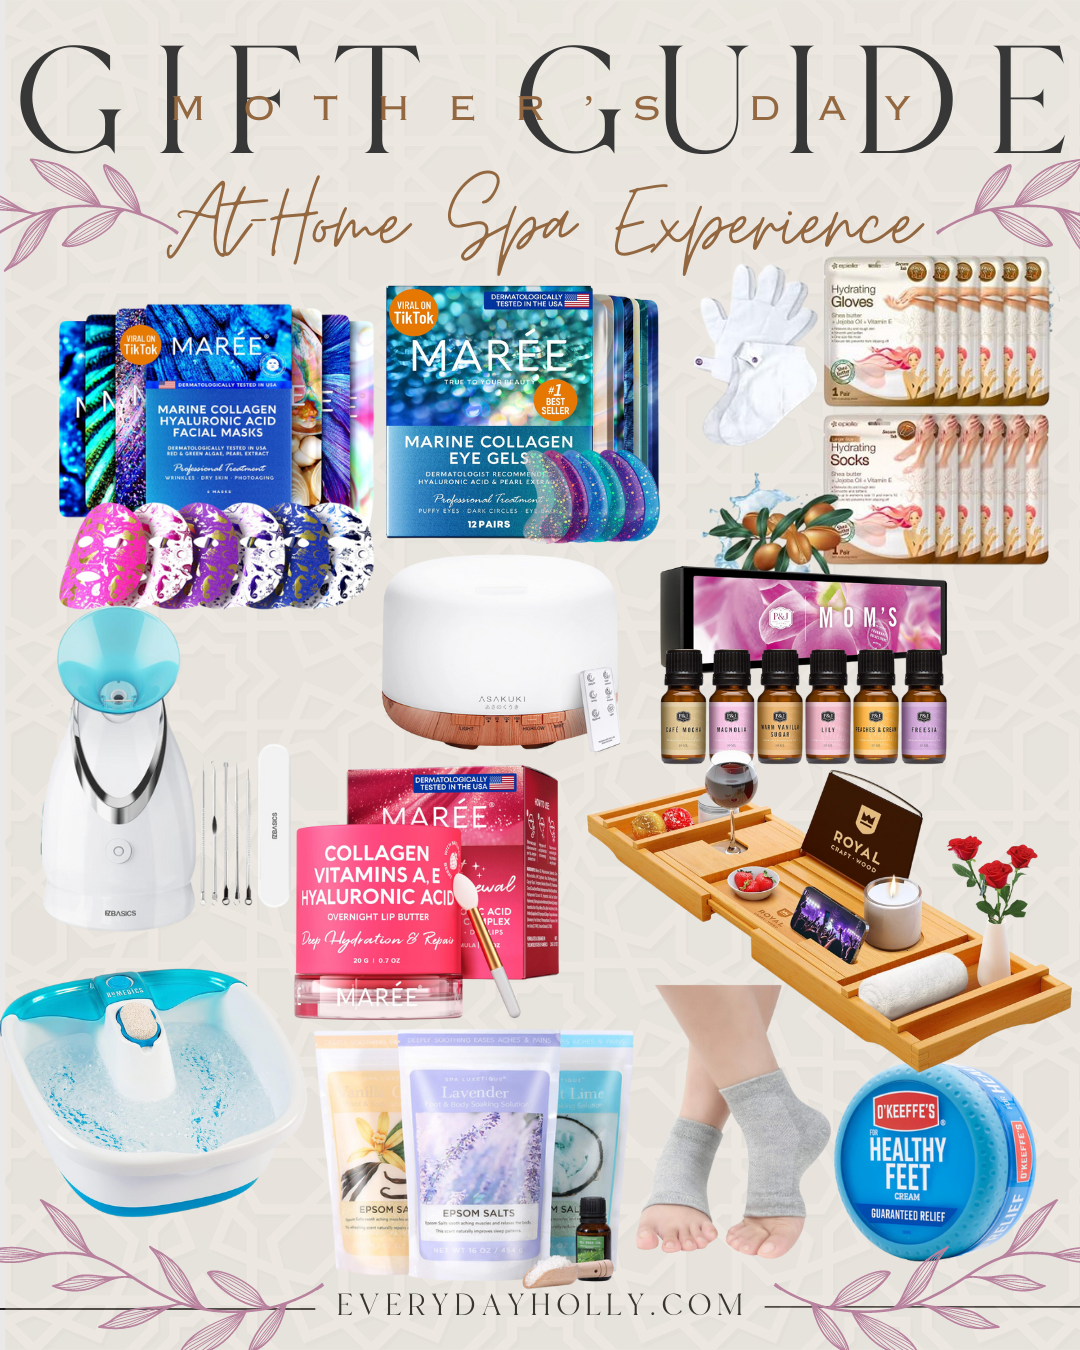 55 gift ideas your mom will love for mother's day | gift guide, gift ideas, mother's day, gifts for her, gifts for mom, at home spa experience, at home spa, skincare, self care, face mask, bathtub tray